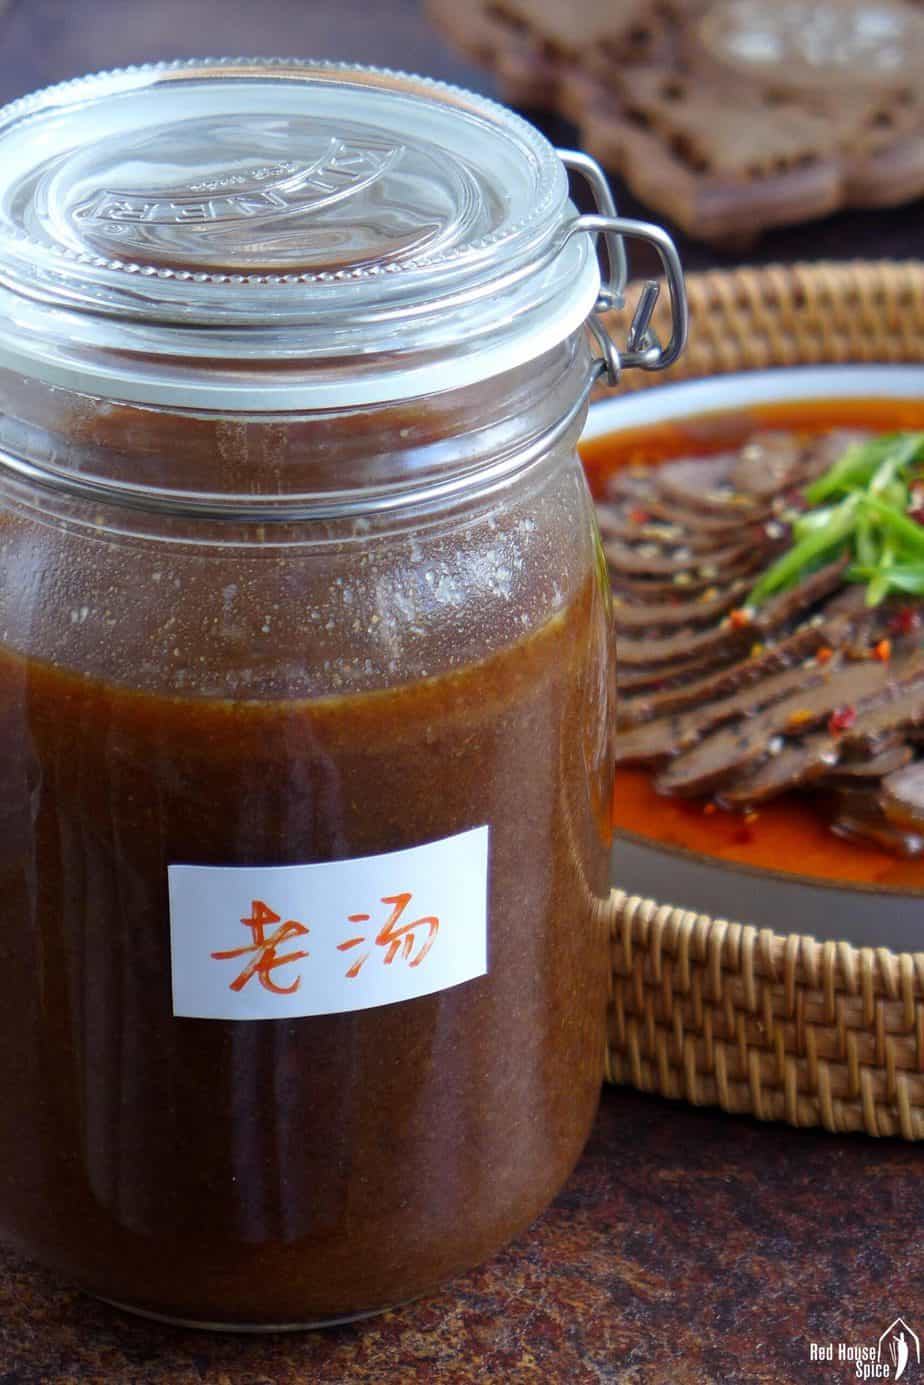 A jar of spiced beef stock